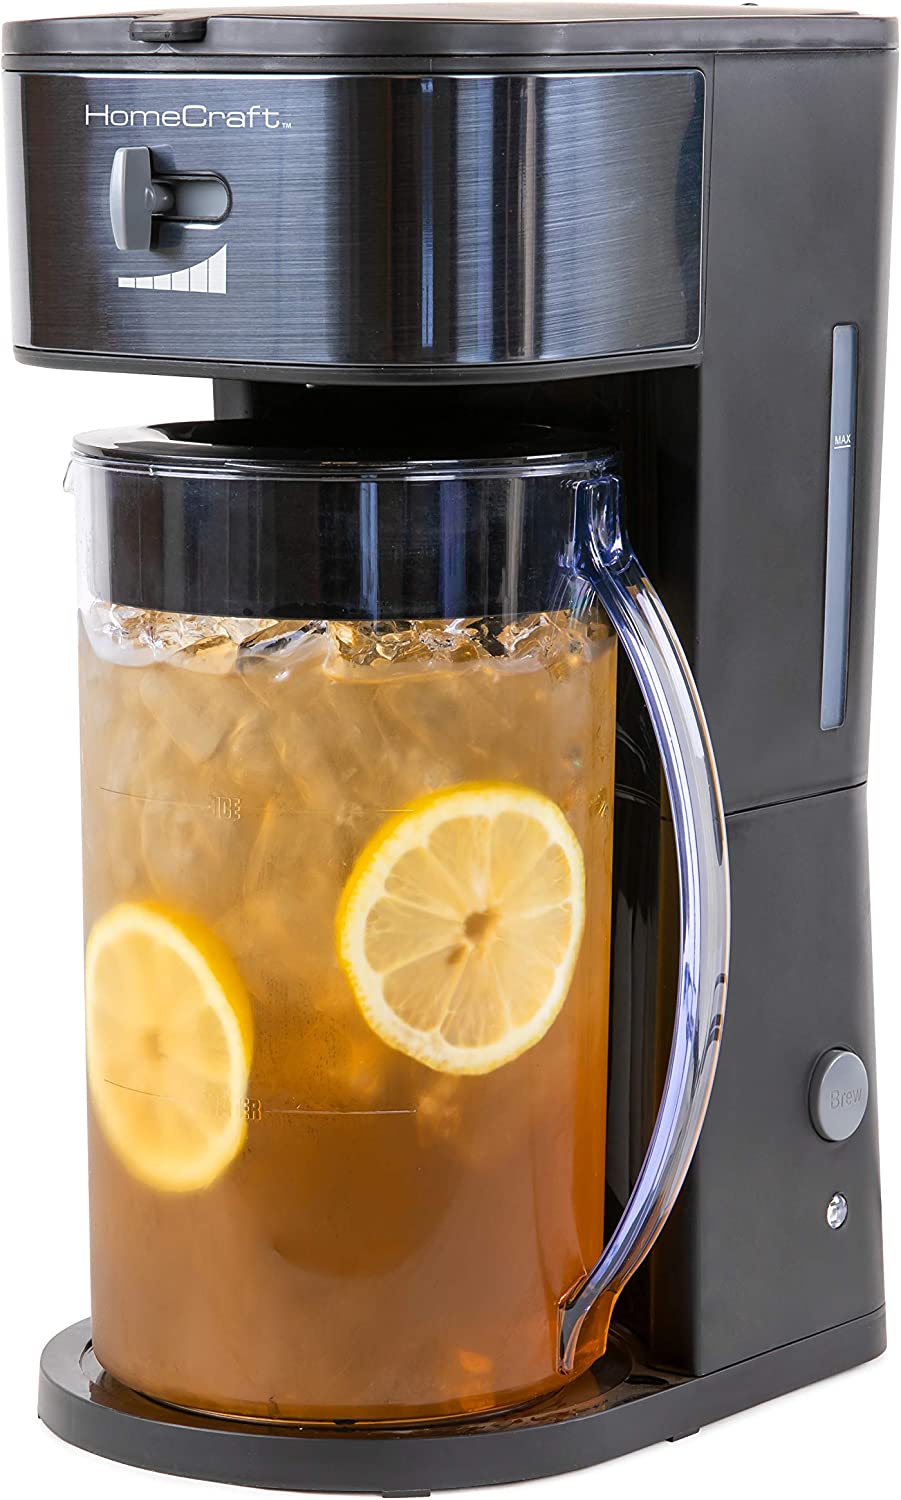 Mr. Coffee The 3 Quart Iced Tea Maker -No Pitcher- Tested & Working